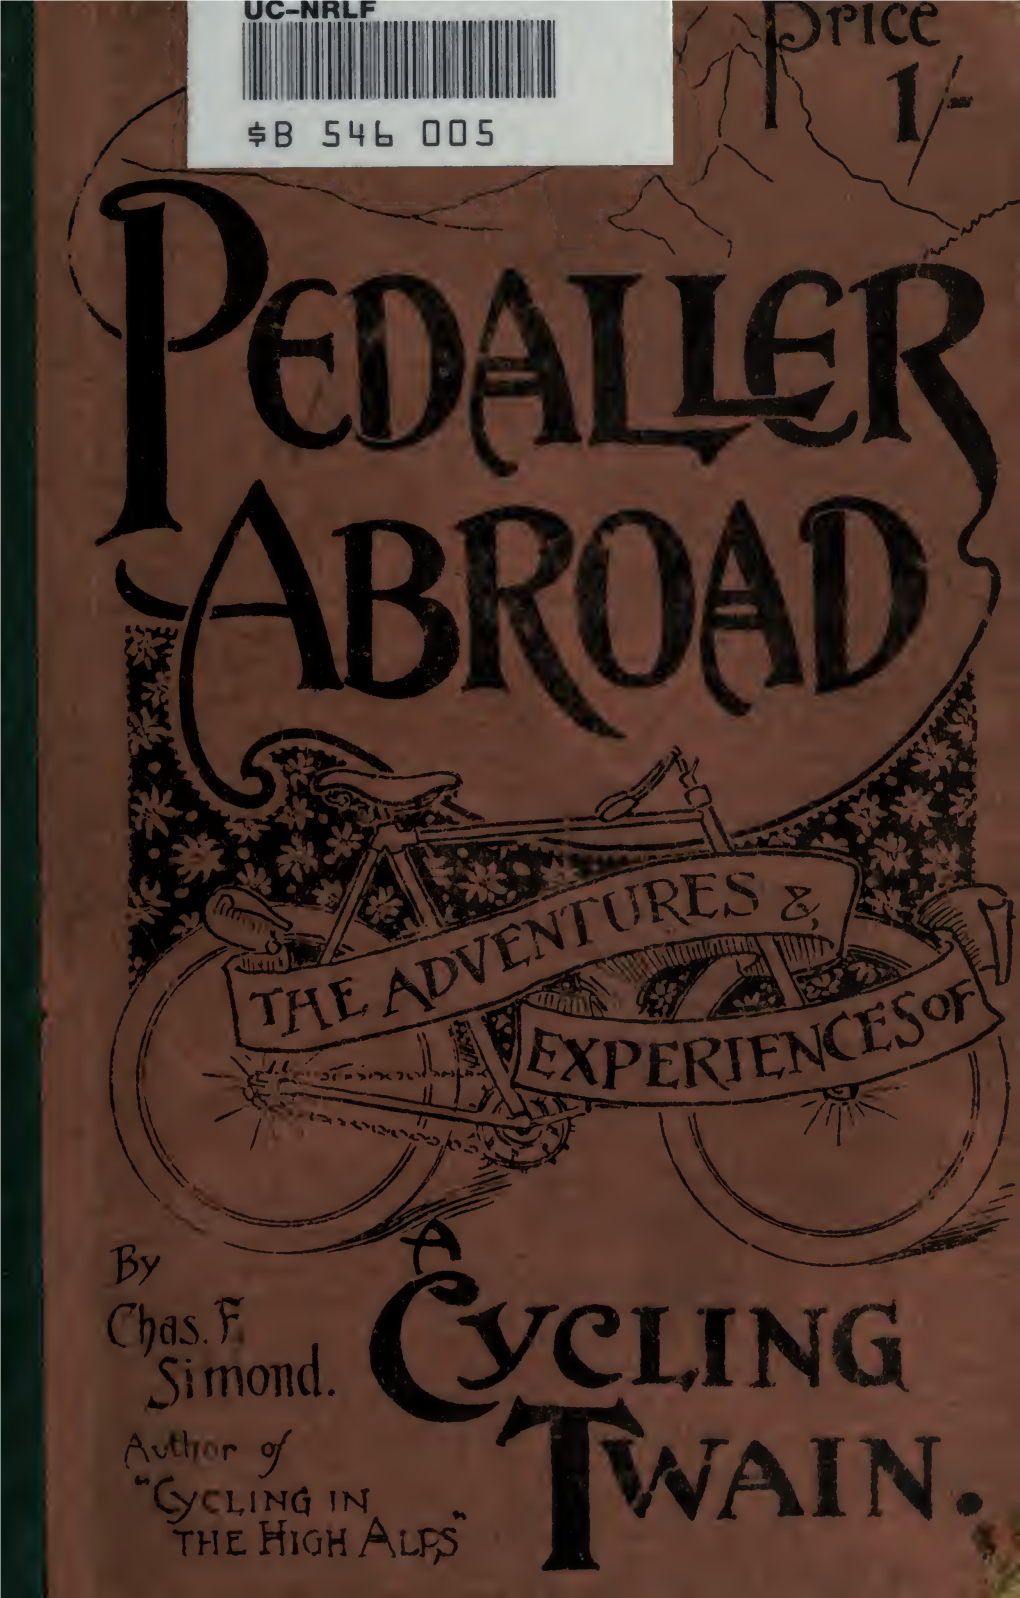 Being an Illustrated Narrative of the Adventures and Experiences of A